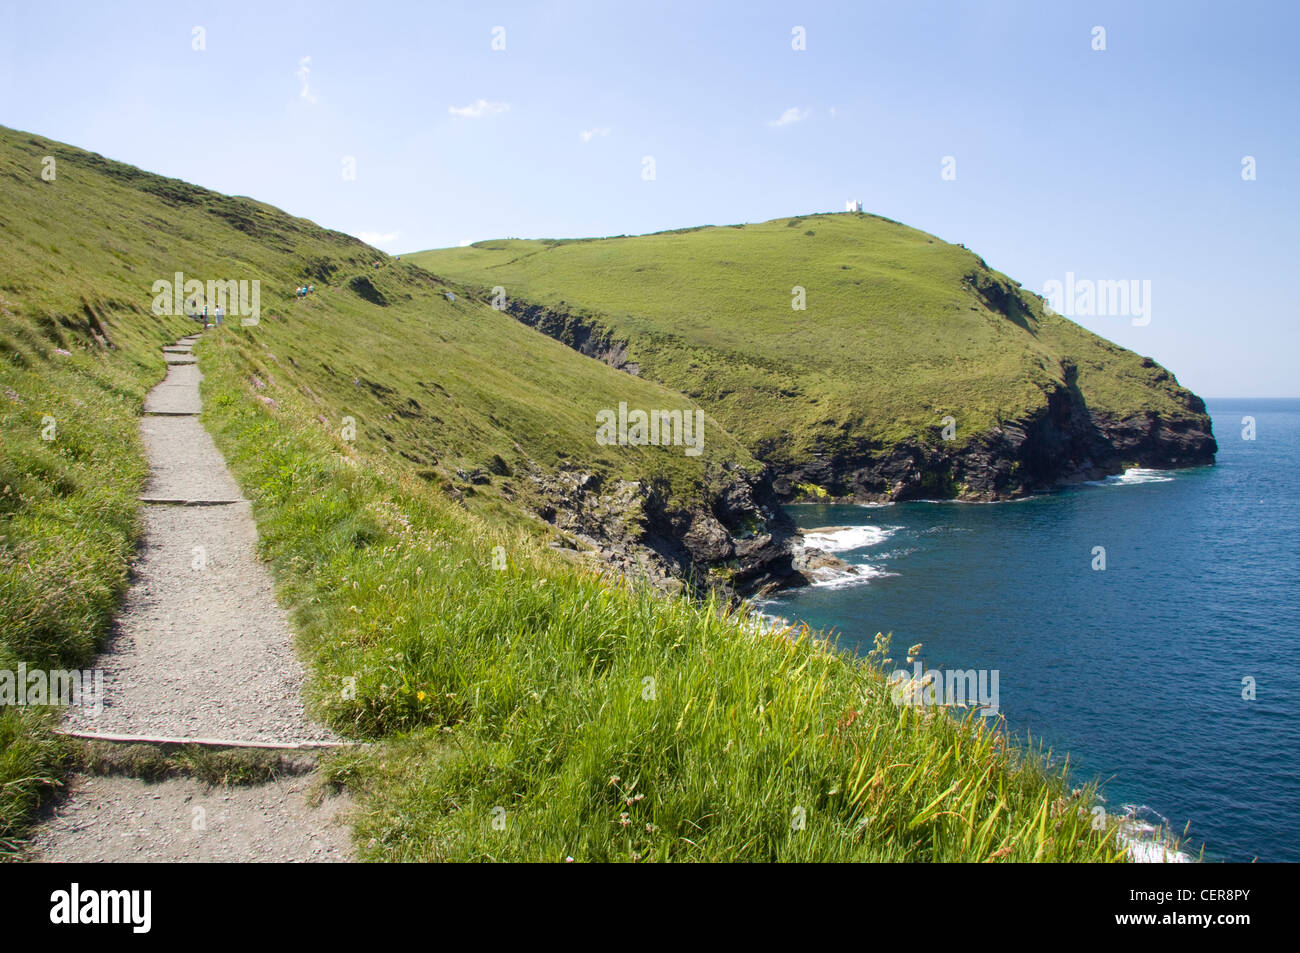 Footpath from Boscastle Harbour leading to the NCI Boscastle Lookout station (Willapark Lookout) on top of the ridge. Stock Photo